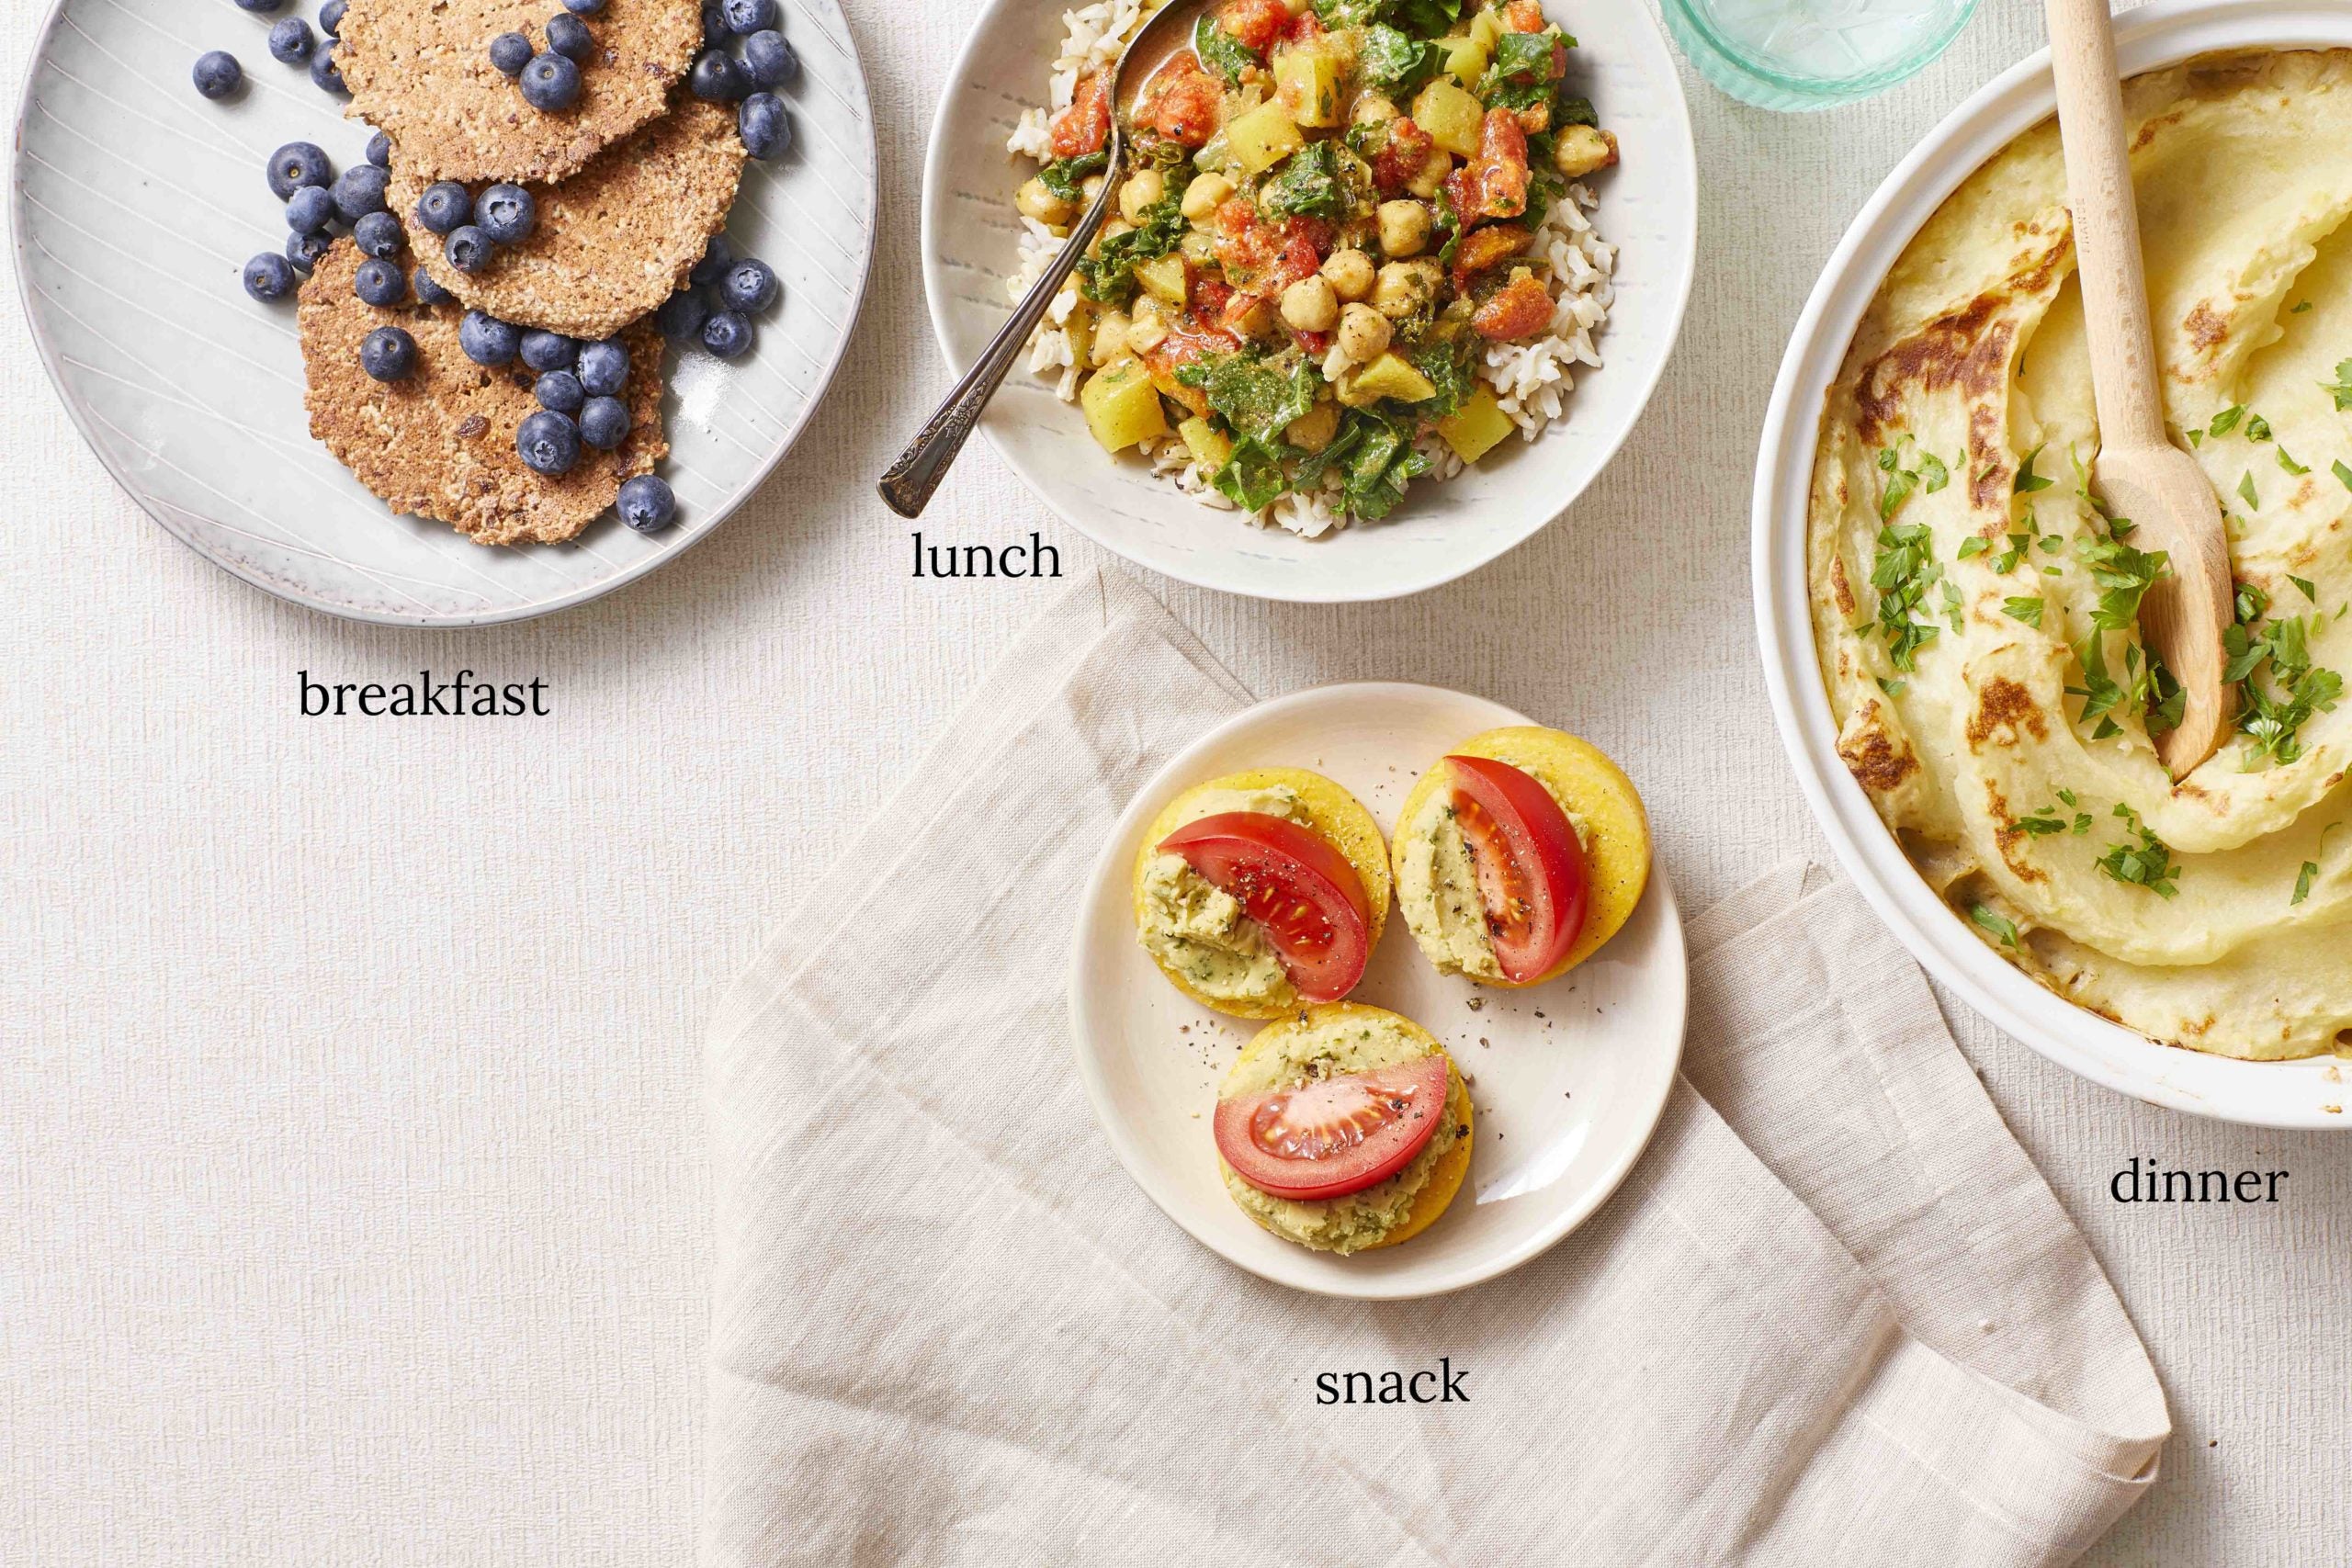 Day 6 of week vegan meal plan - white table with four dishes spread across it: Blueberry pancakes, chickpea casserole, a shepherd's pie, and polenta slices stacked with vegetables